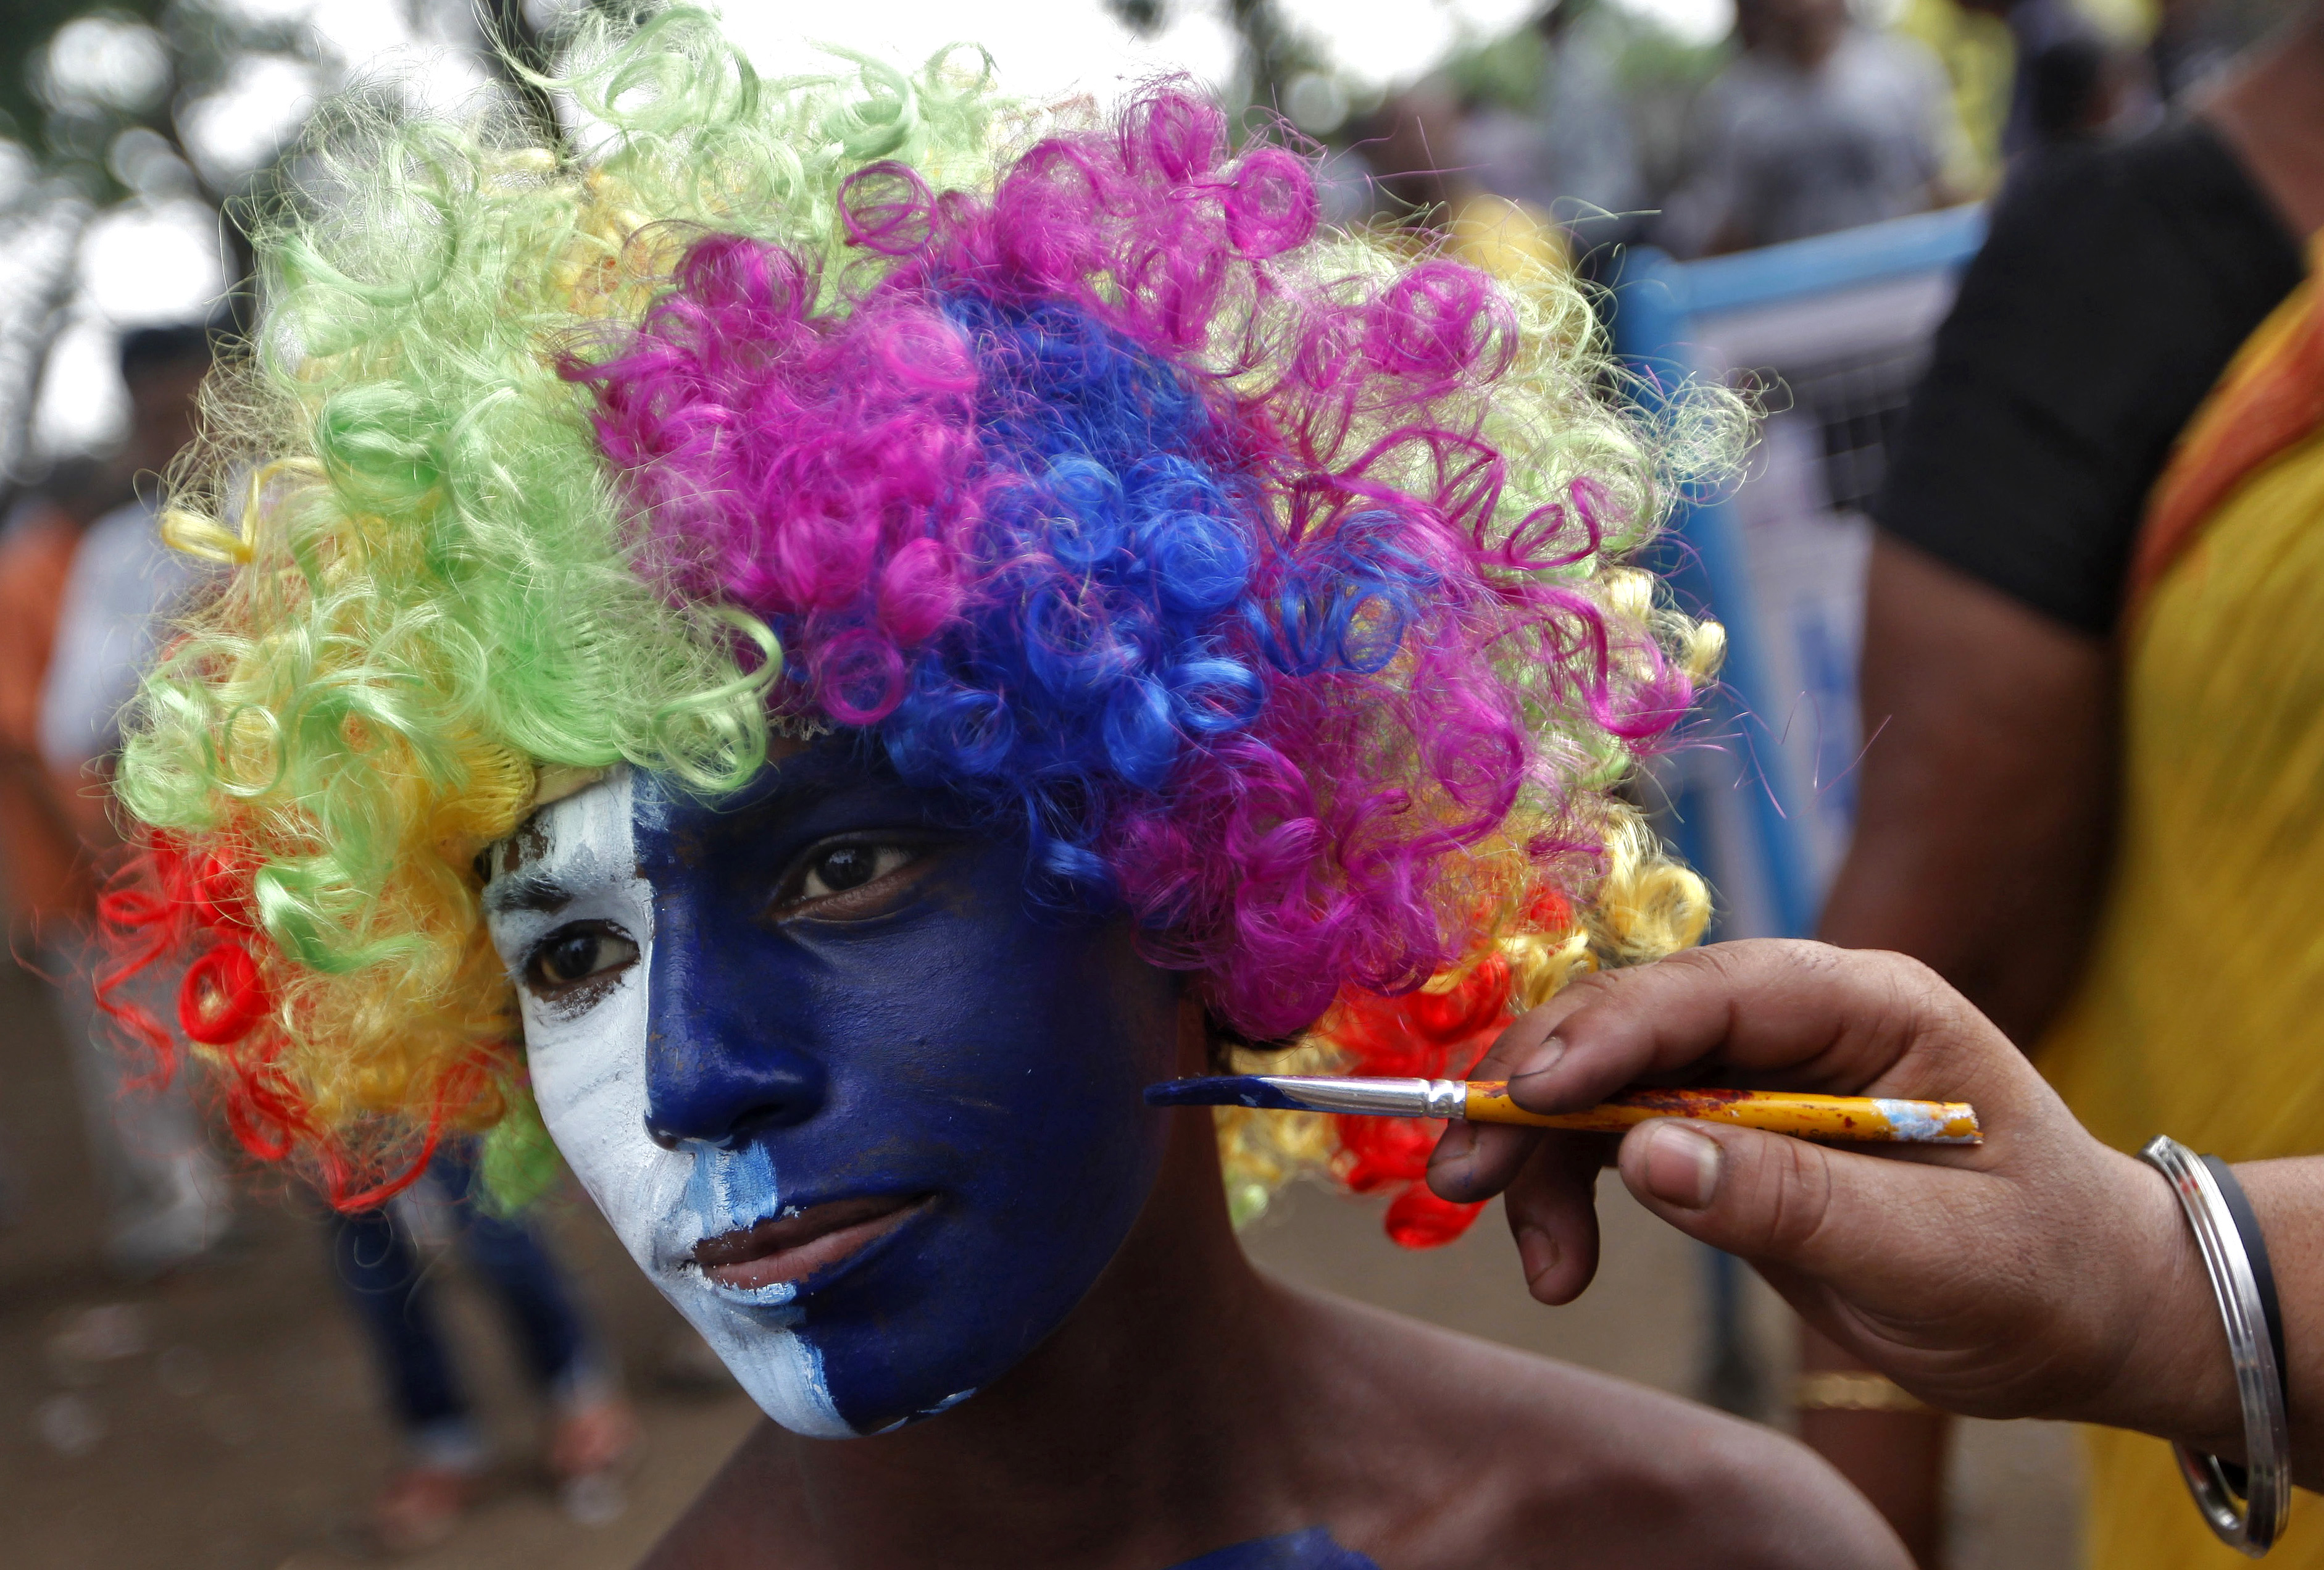 A cricket fan gets his face painted before the IPL qualifier 2 match outside a stadium in Kolkata